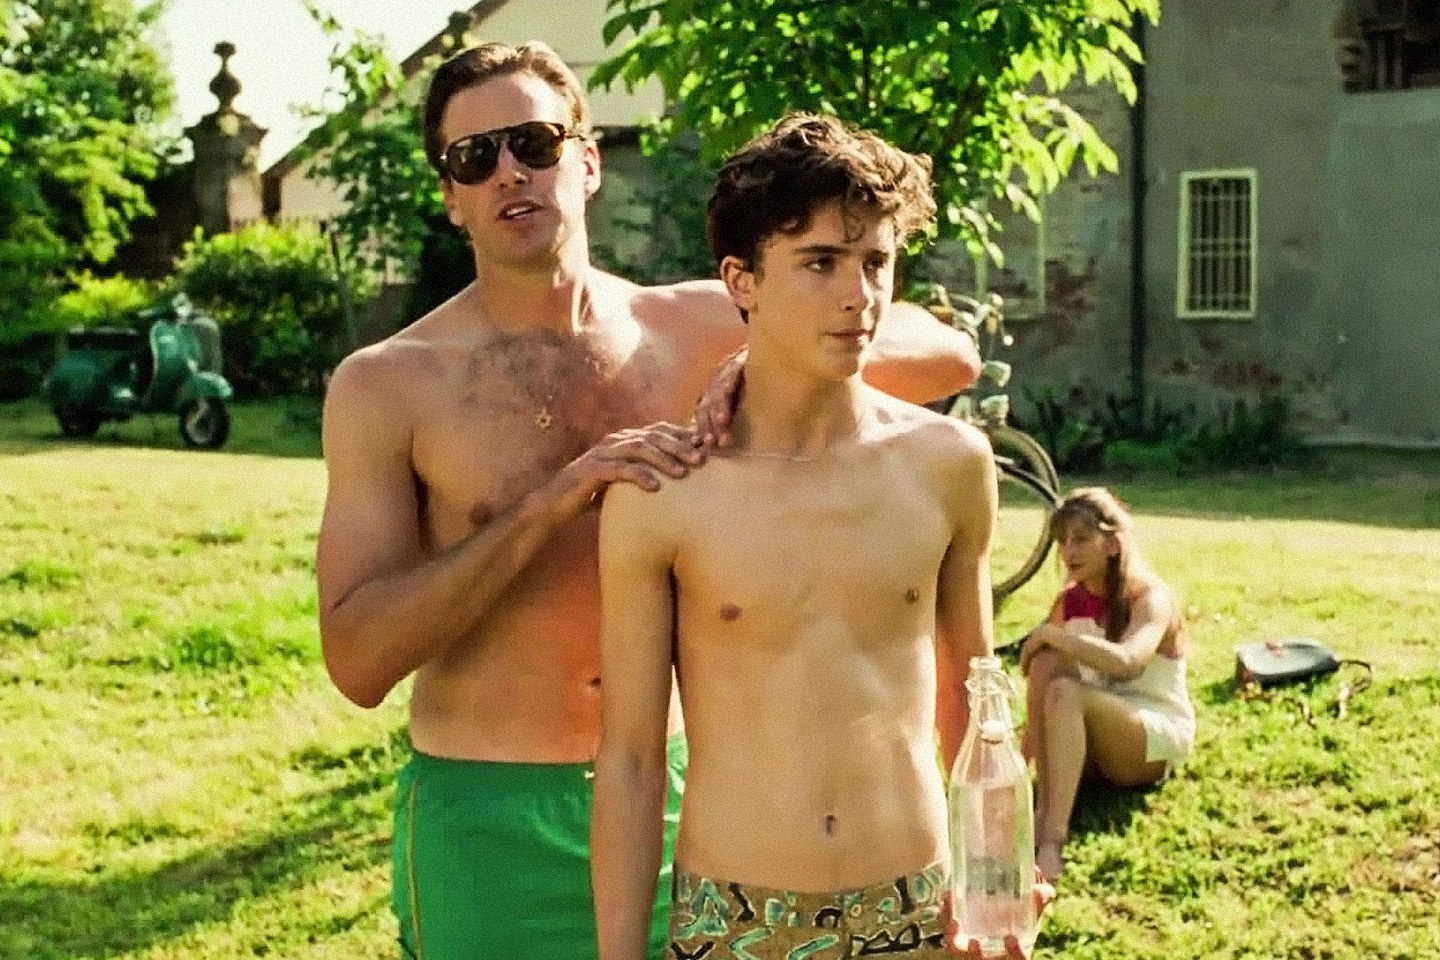 Call me by your name straight sex scene